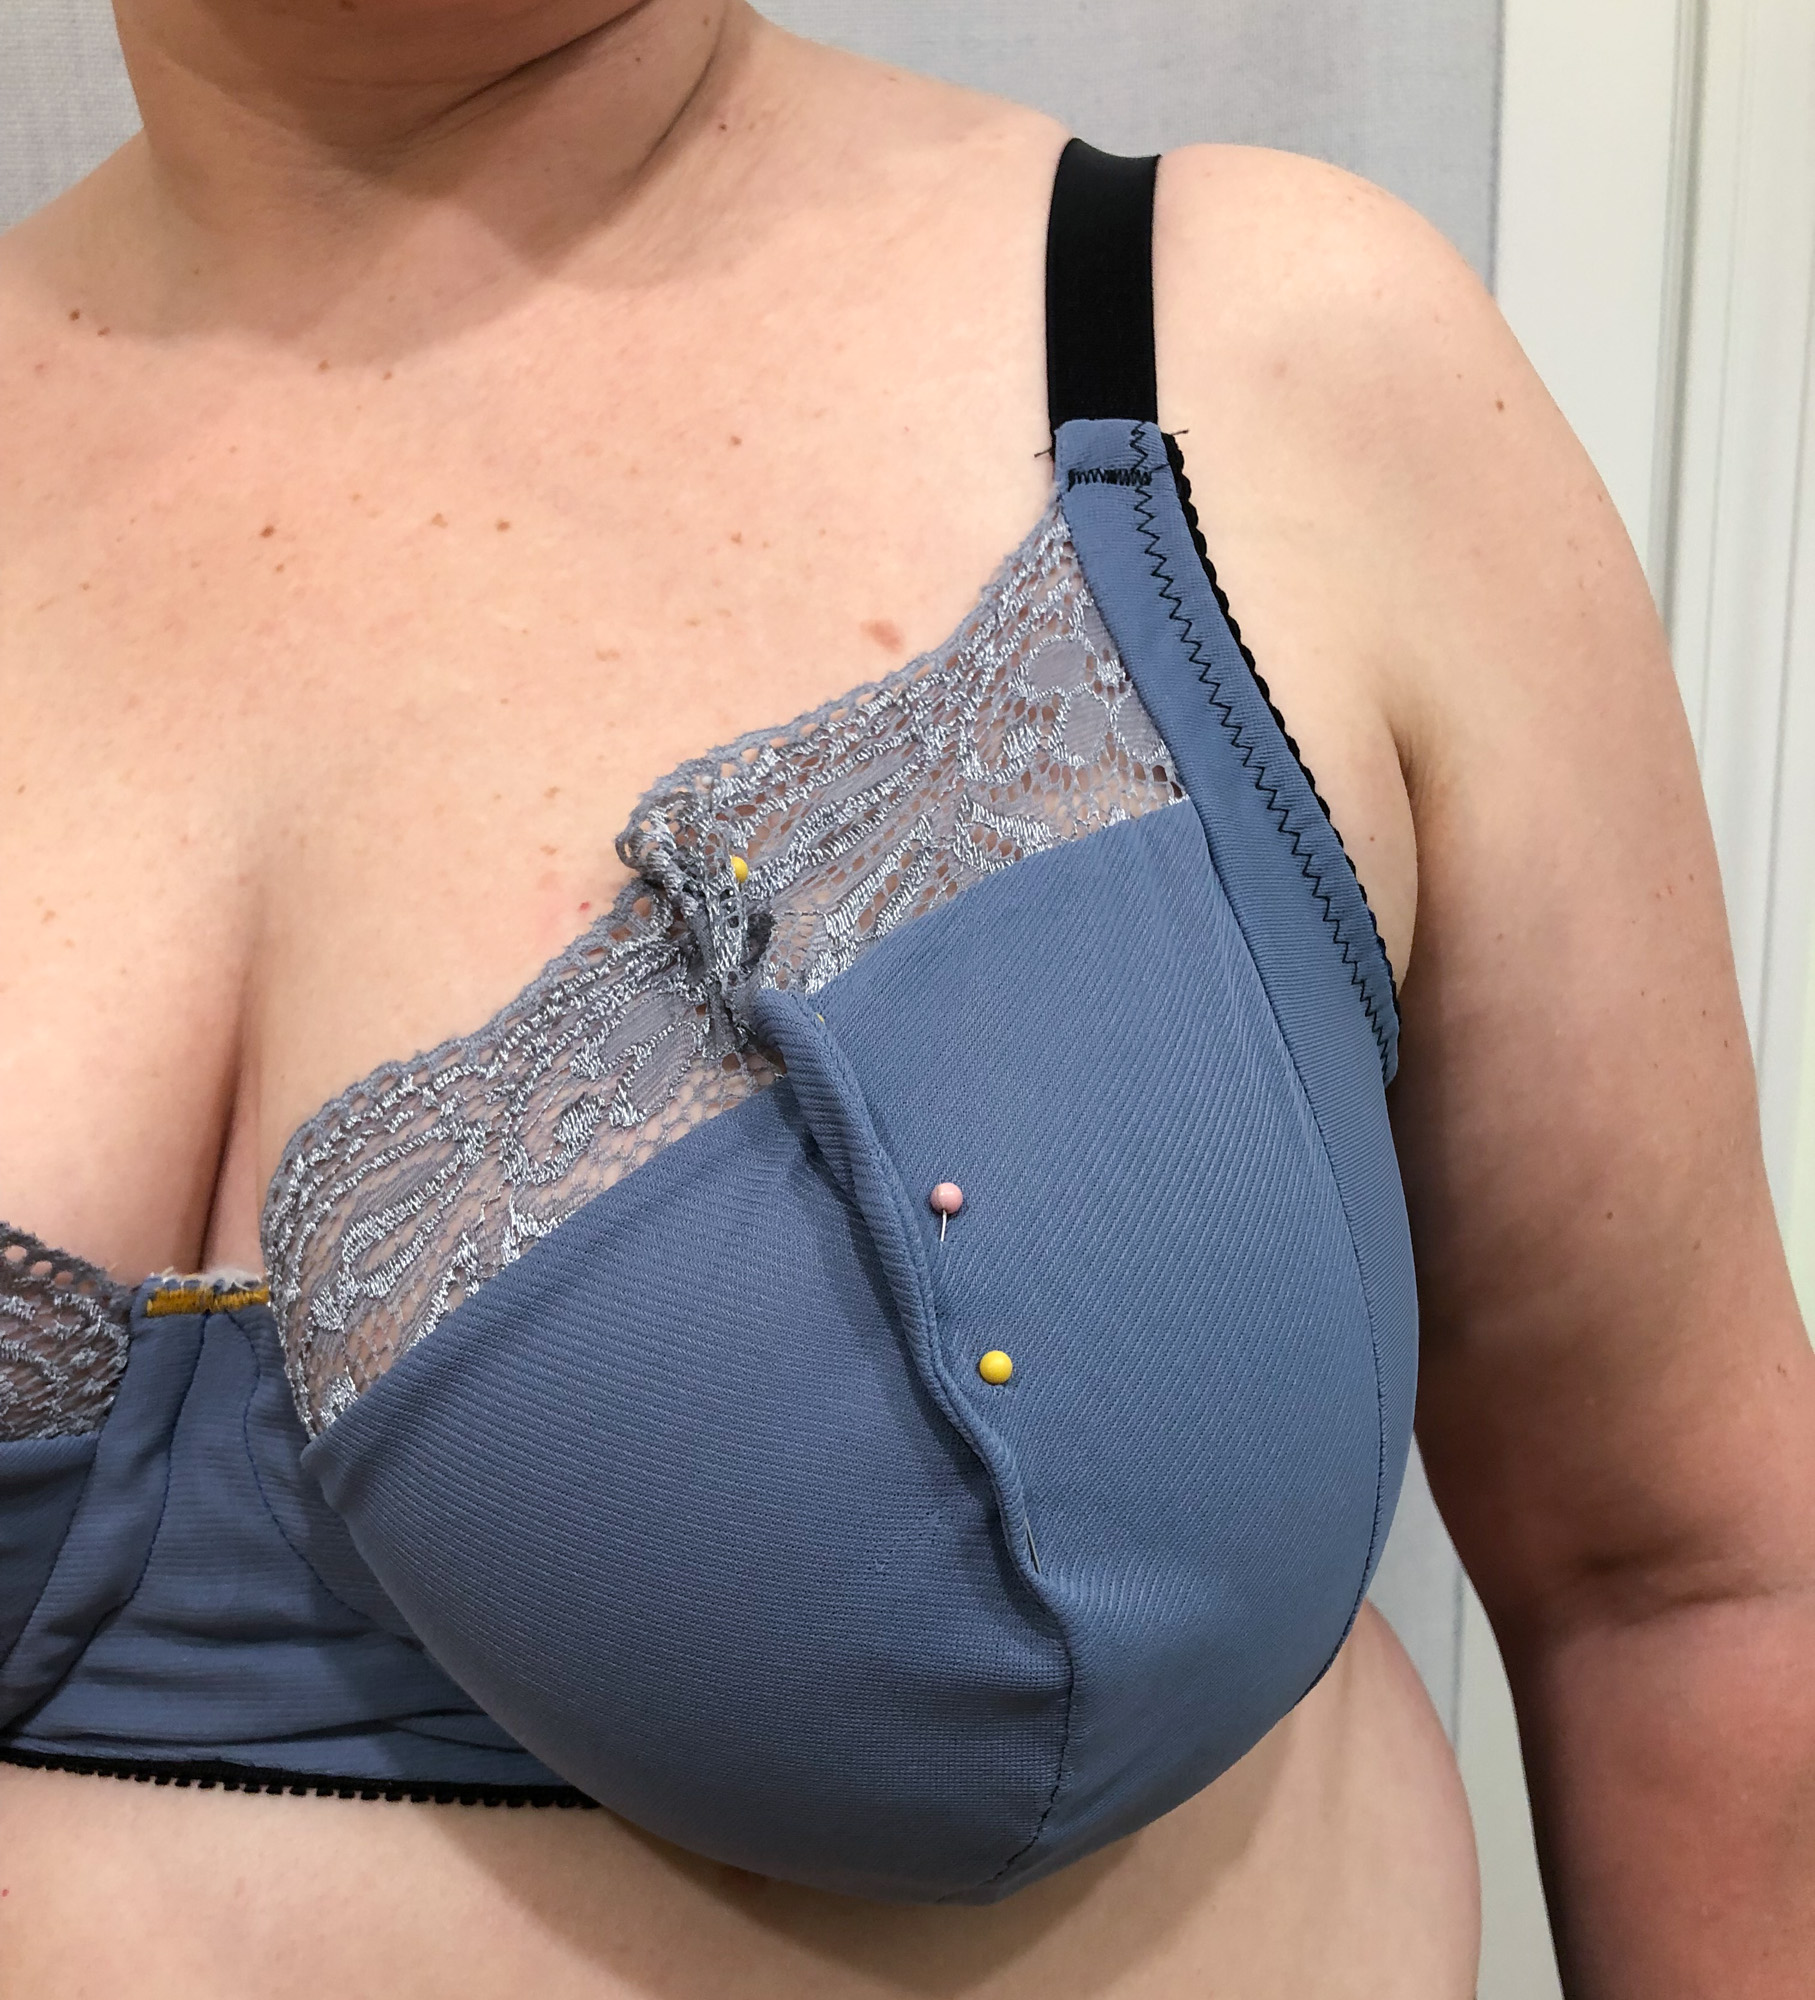 How should I alter the bra cups? Replace with nude cups or add white fabric  underlay to the stomach area to match the white cups? : r/weddingdress